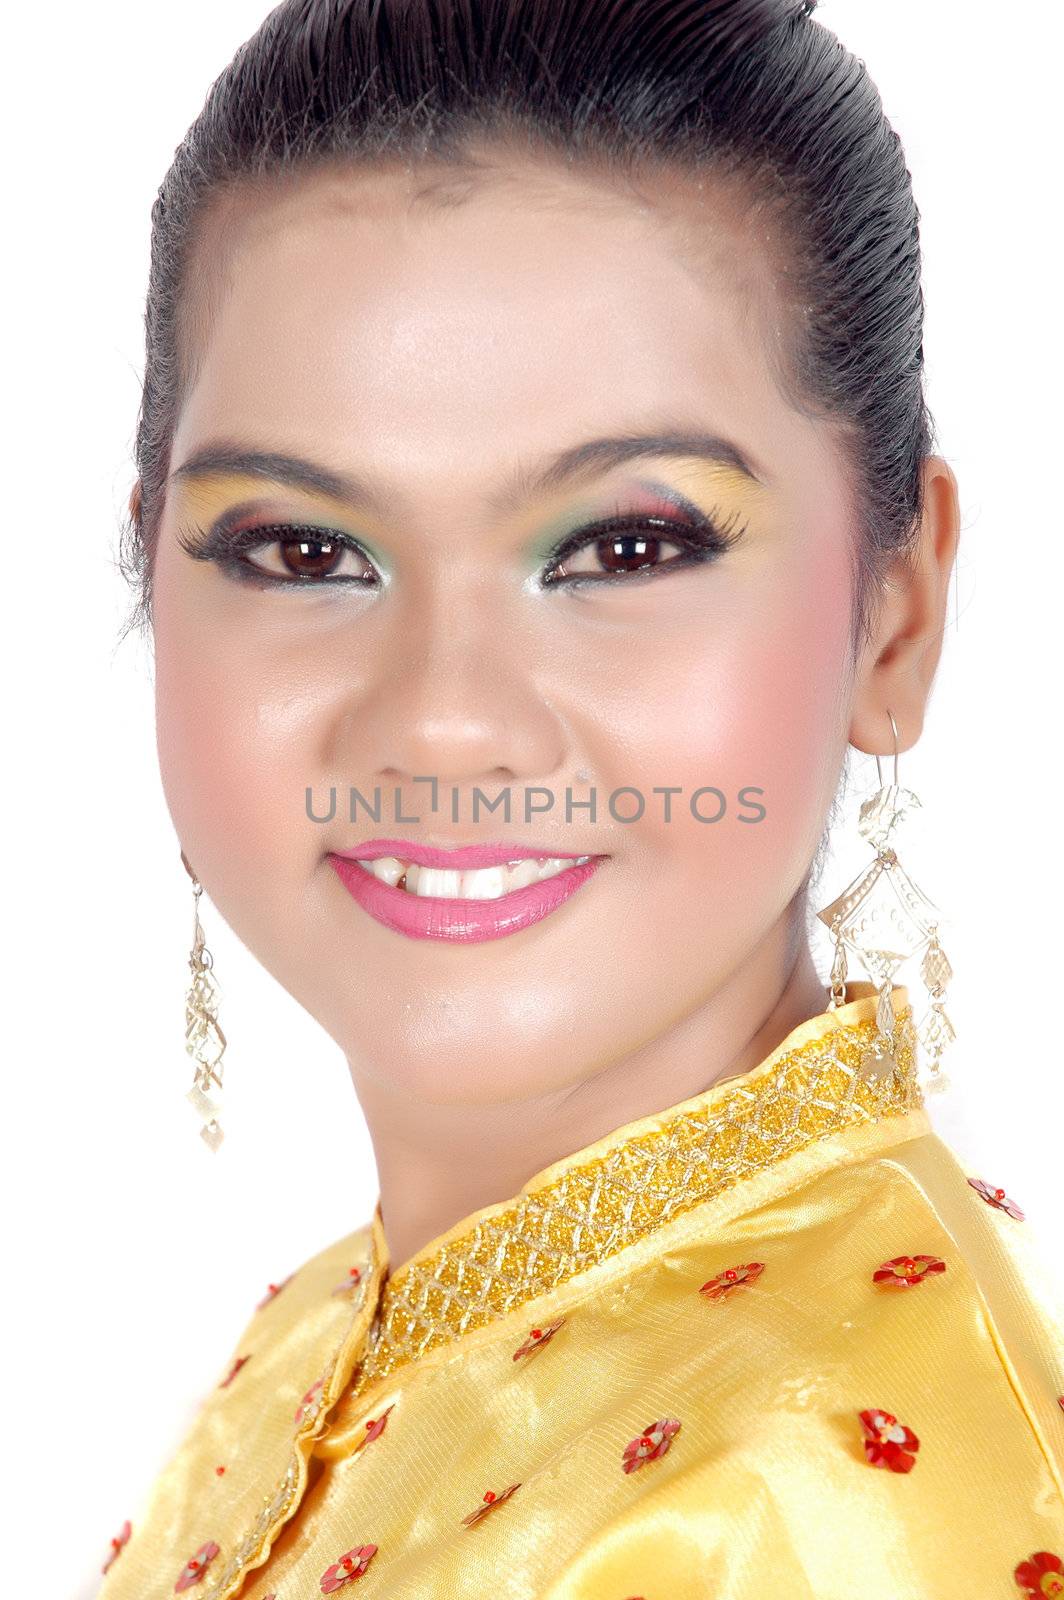 portrait of an asian young girl dressed in traditional indigenous tribal borneo isolated on white background